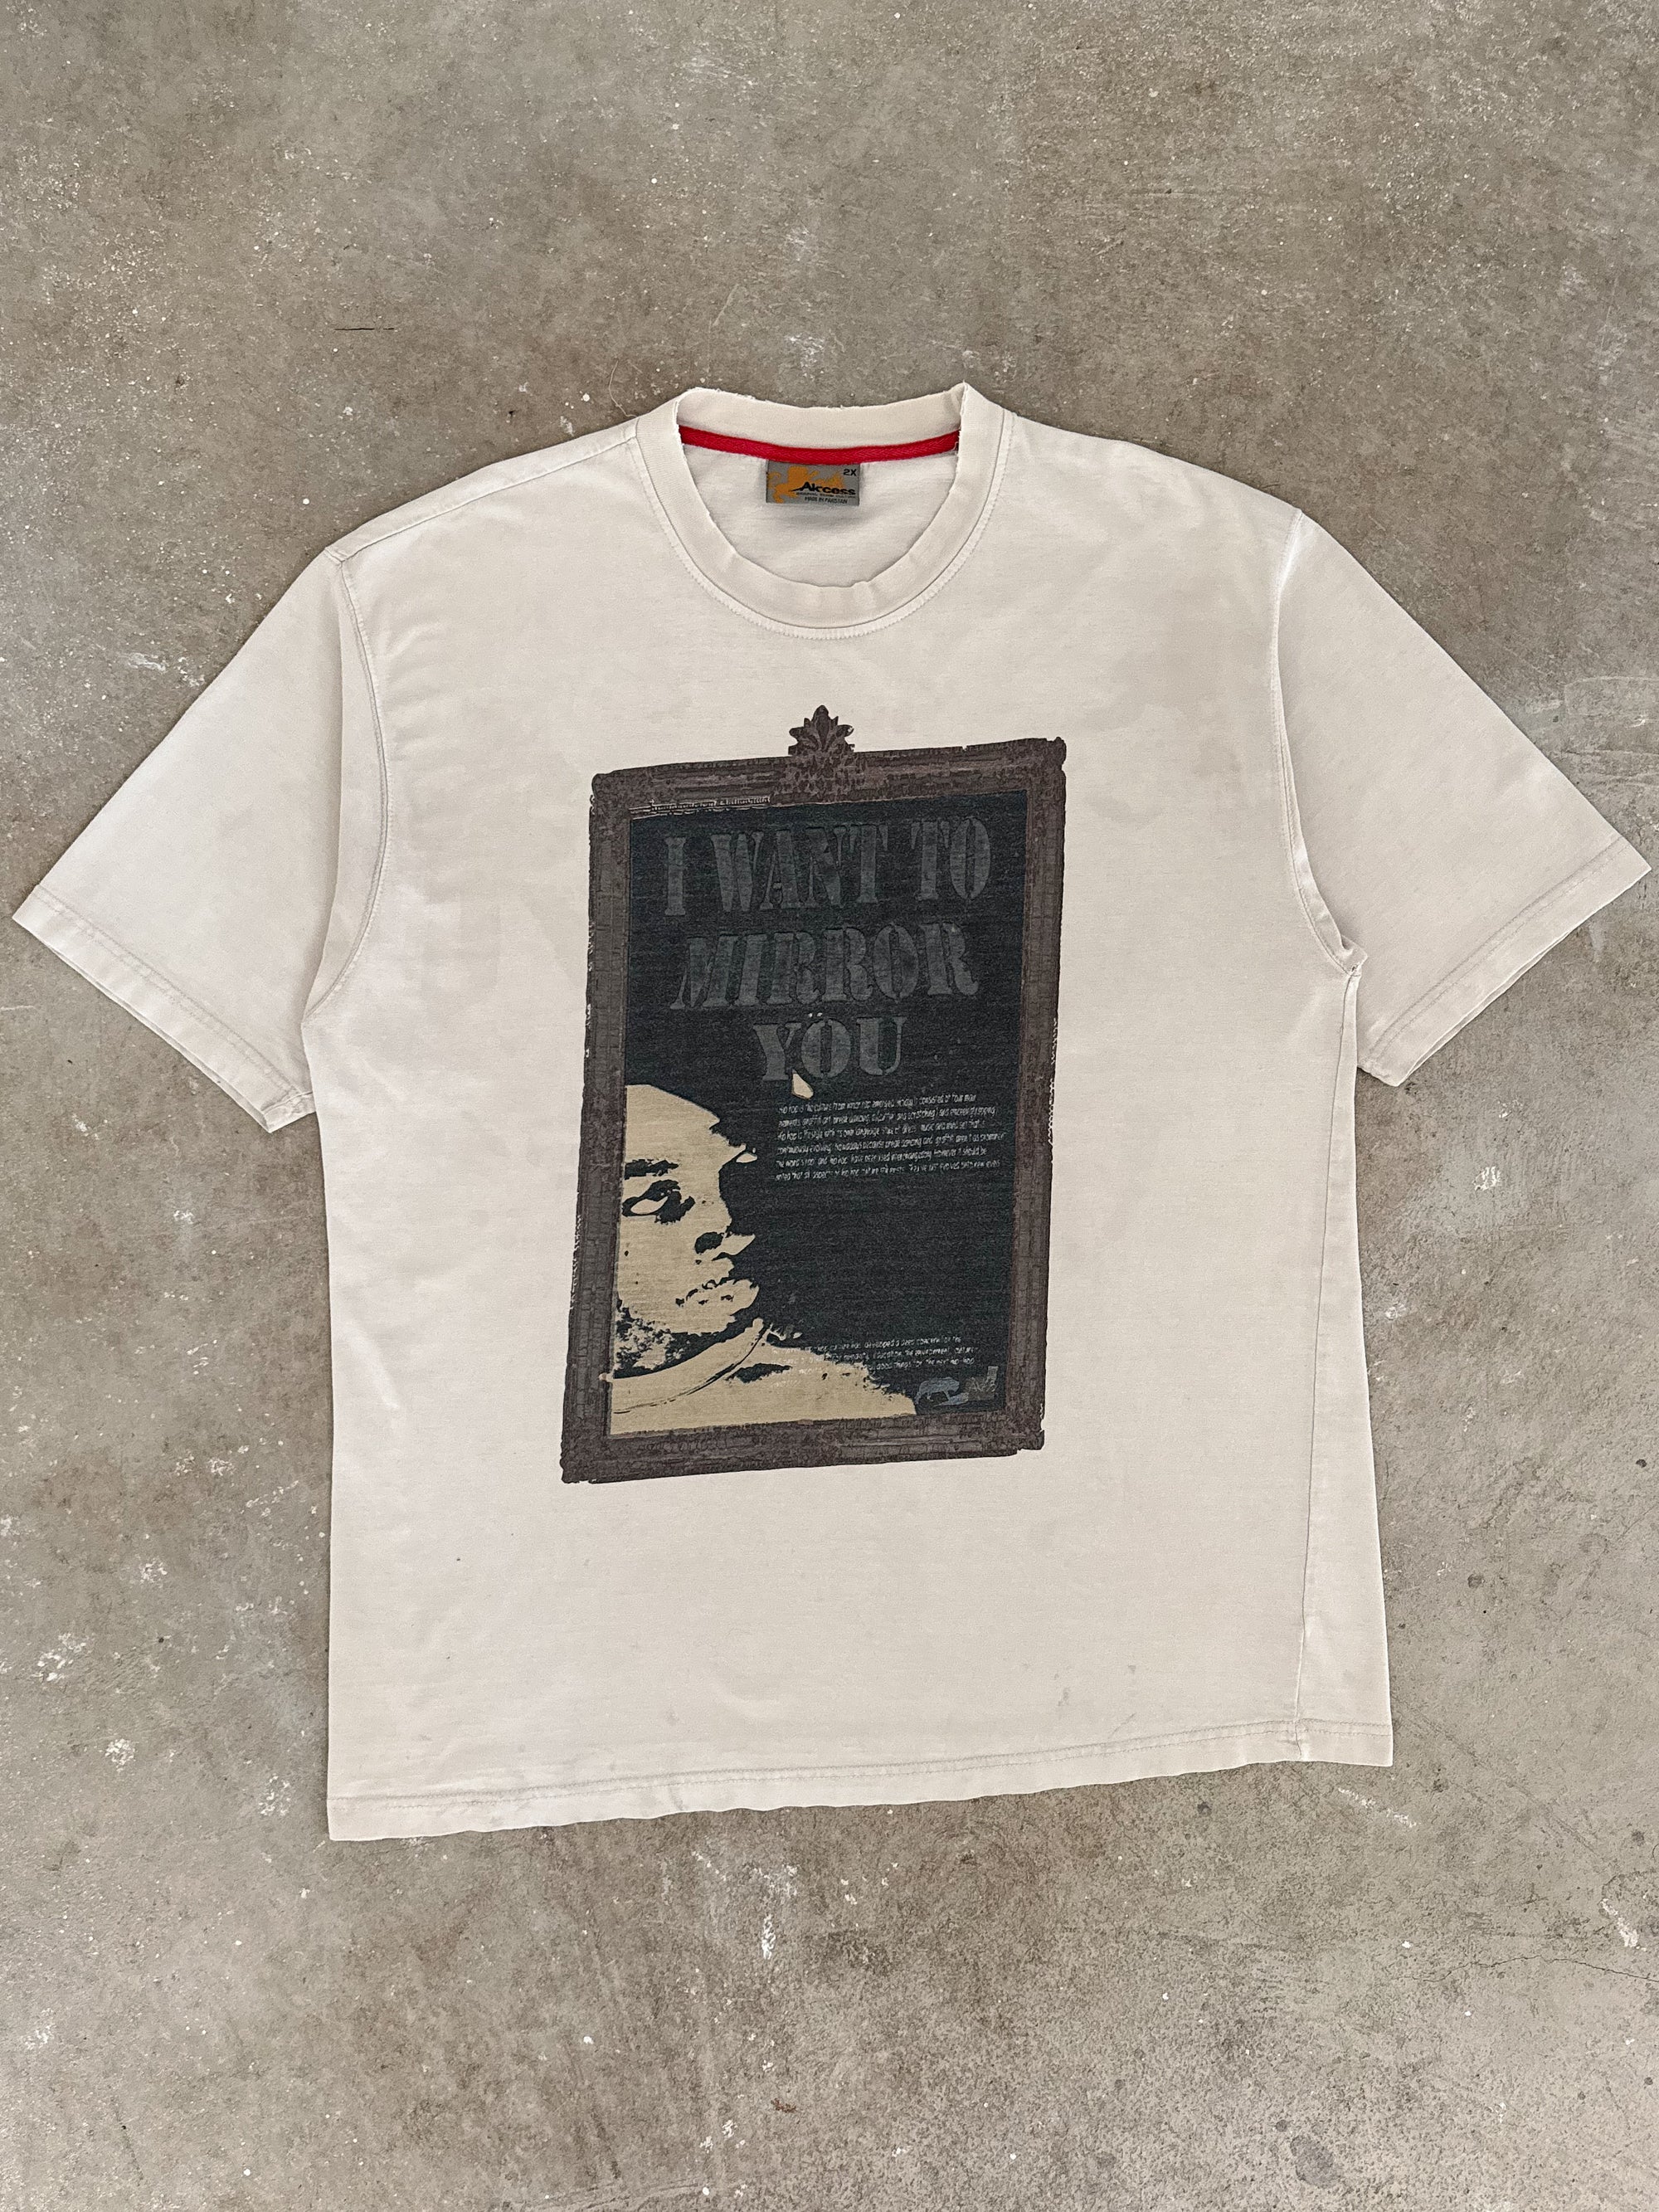 2000s "I Want To Mirror You" Tee (XXL)